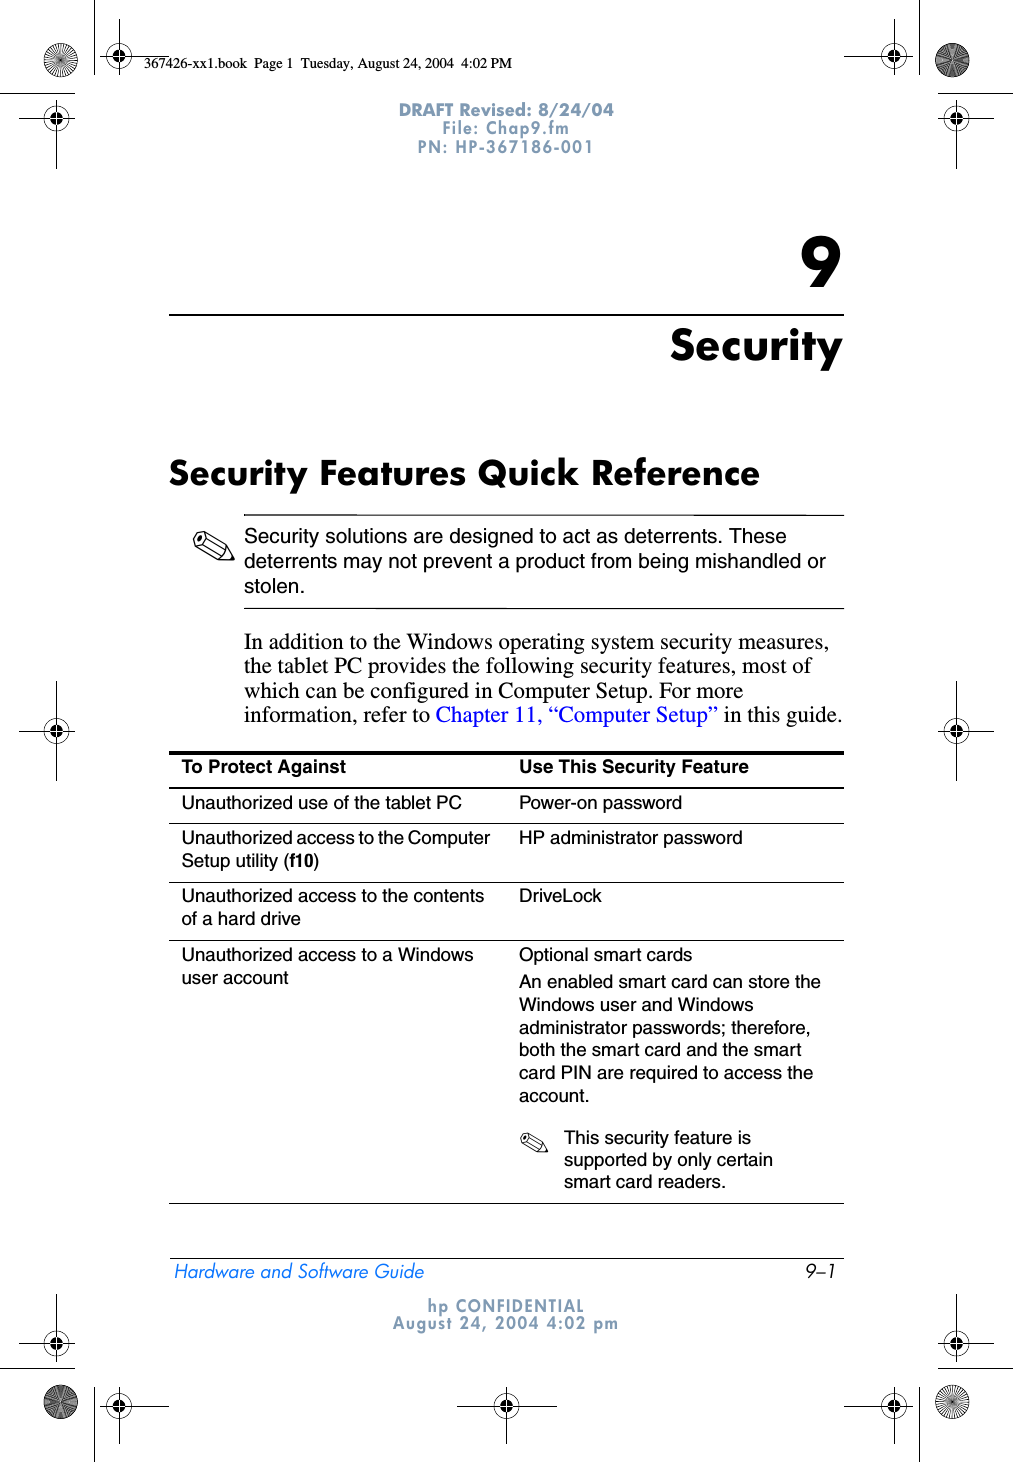 Hardware and Software Guide 9–1DRAFT Revised: 8/24/04File: Chap9.fm PN: HP-367186-001 hp CONFIDENTIALAugust 24, 2004 4:02 pm9SecuritySecurity Features Quick Reference✎Security solutions are designed to act as deterrents. These deterrents may not prevent a product from being mishandled or stolen.In addition to the Windows operating system security measures, the tablet PC provides the following security features, most of which can be configured in Computer Setup. For more information, refer to Chapter 11, “Computer Setup” in this guide.To Protect Against Use This Security FeatureUnauthorized use of the tablet PC Power-on passwordUnauthorized access to the Computer Setup utility (f10)HP administrator passwordUnauthorized access to the contents of a hard driveDriveLockUnauthorized access to a Windows user accountOptional smart cardsAn enabled smart card can store the Windows user and Windows administrator passwords; therefore, both the smart card and the smart card PIN are required to access the account.✎This security feature is supported by only certain smart card readers. 367426-xx1.book  Page 1  Tuesday, August 24, 2004  4:02 PM